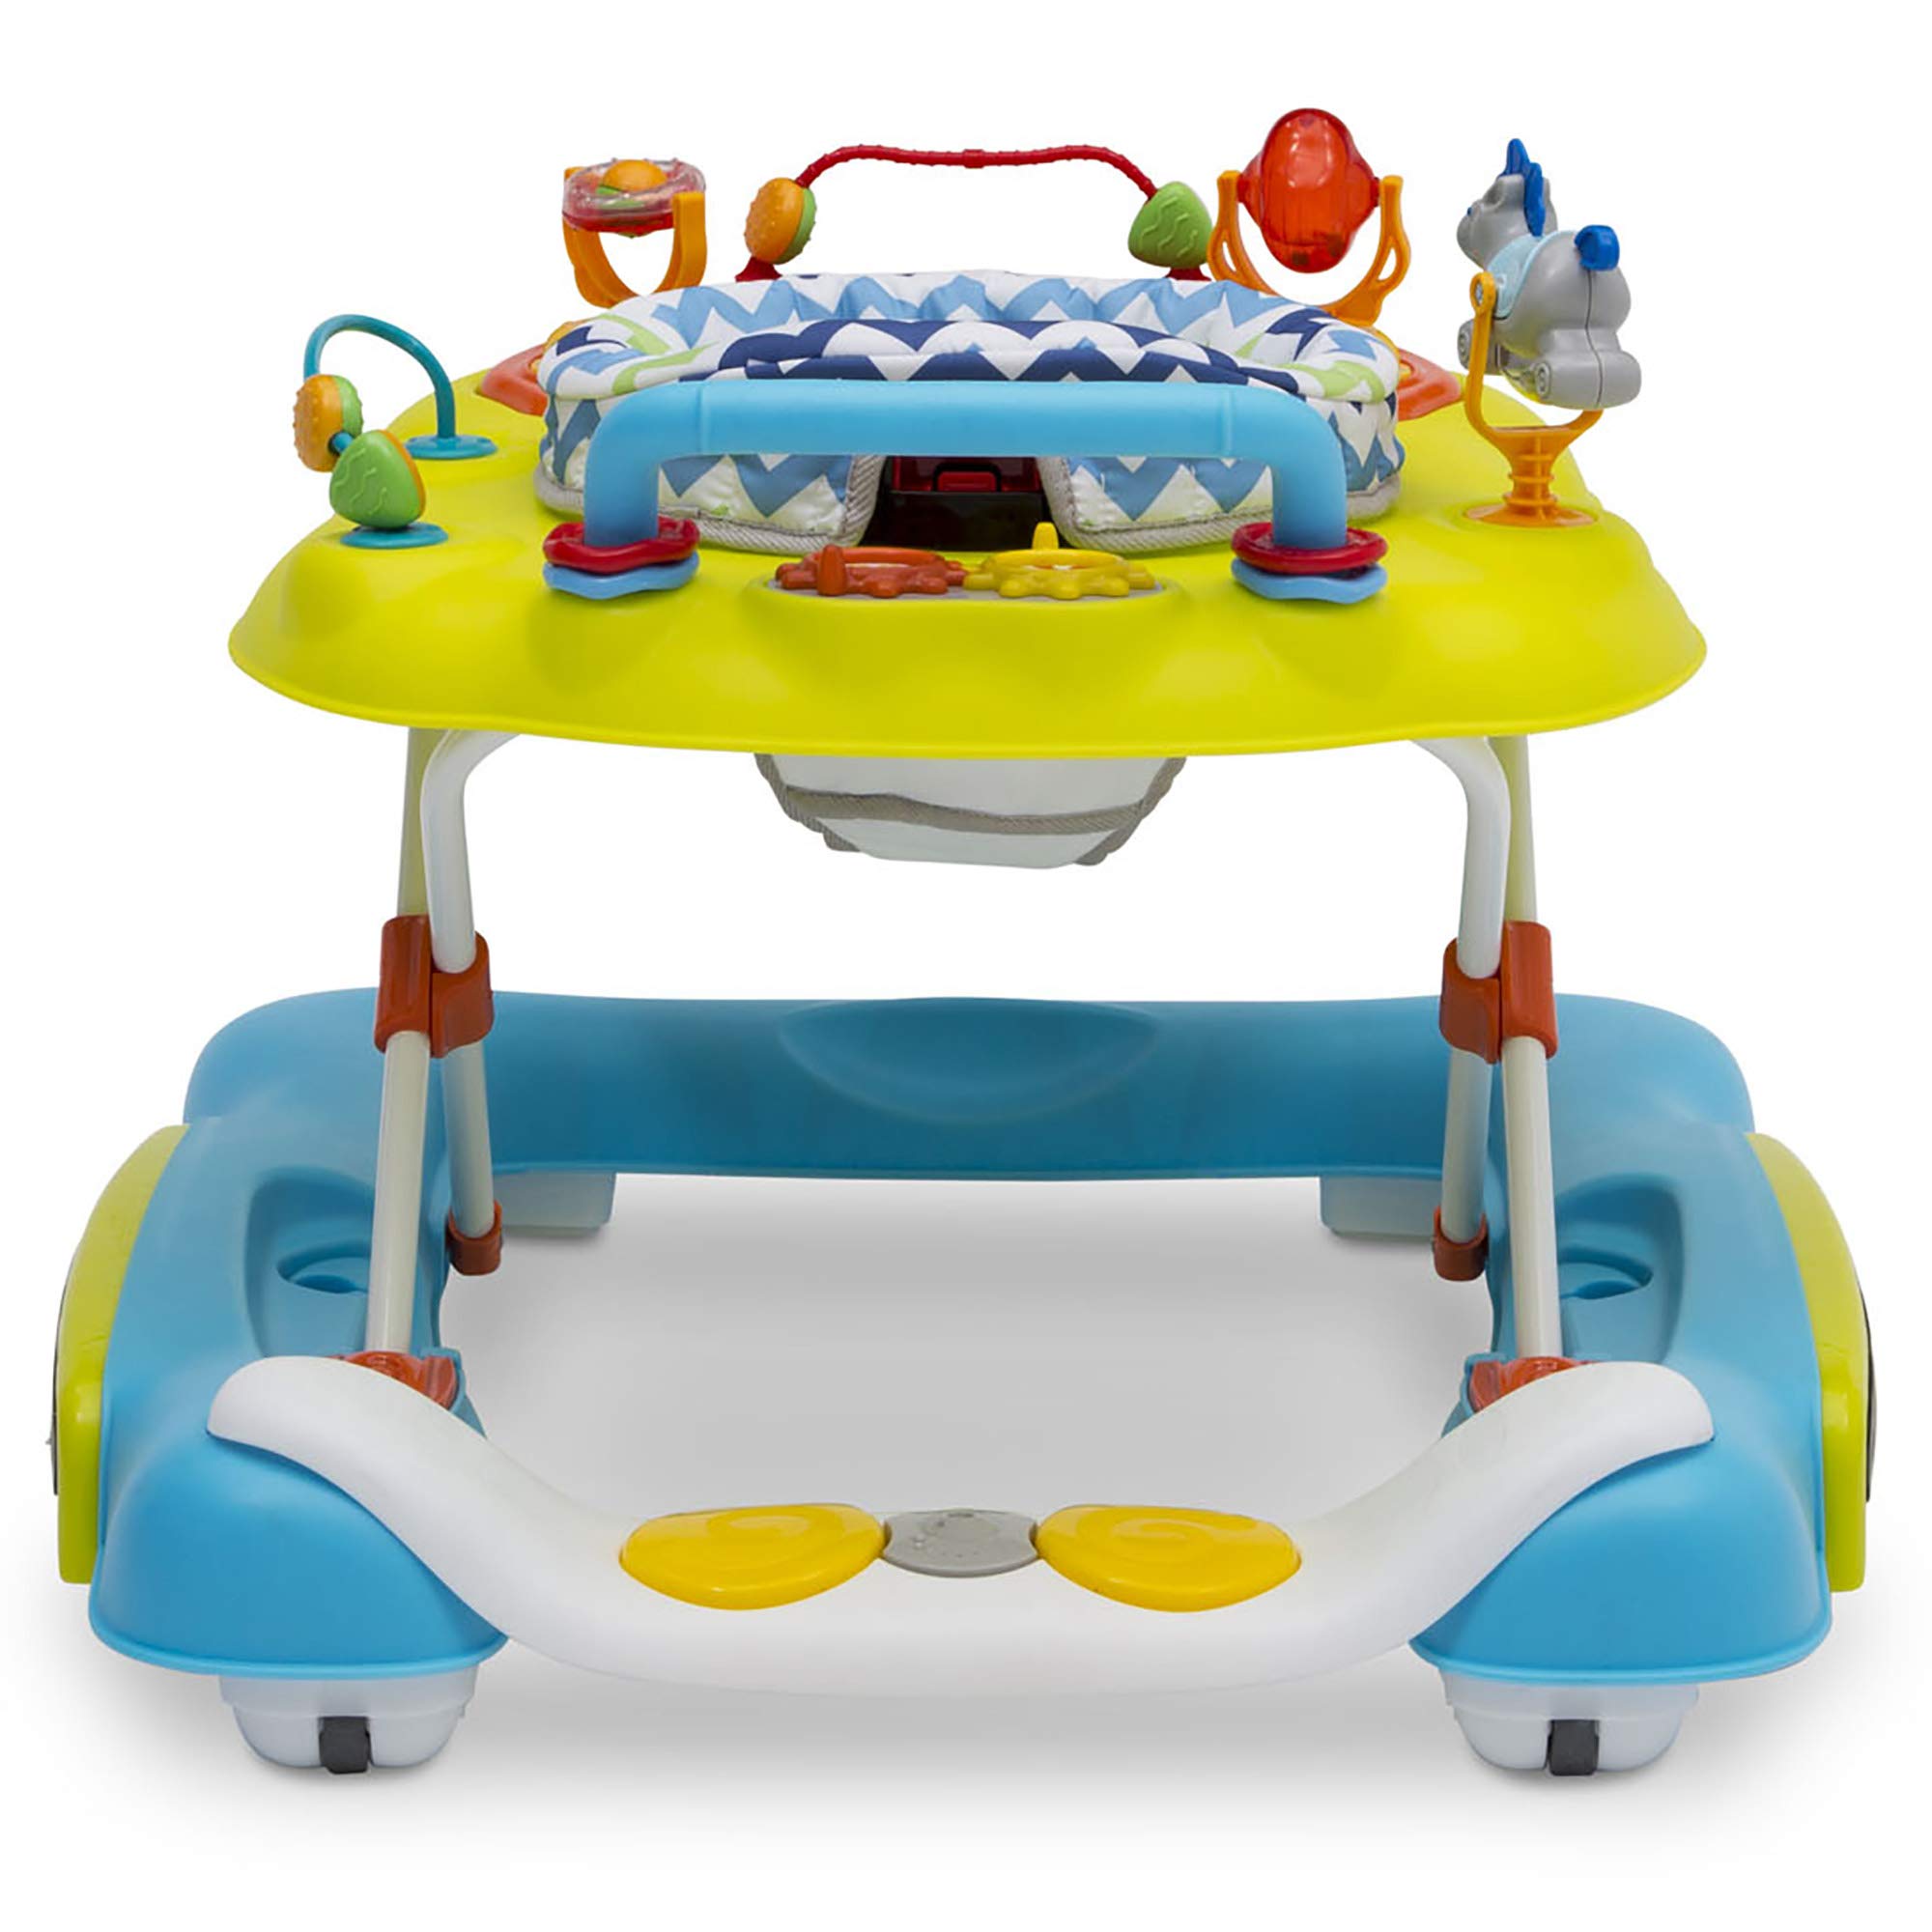 Delta Children 4-in-1 Discover & Play Musical Walker - Features 360 Degree Swivel Seat, Rocker and Walker Mode, Step-to-Play Music, Machine-Washable Seat, Blue/Green